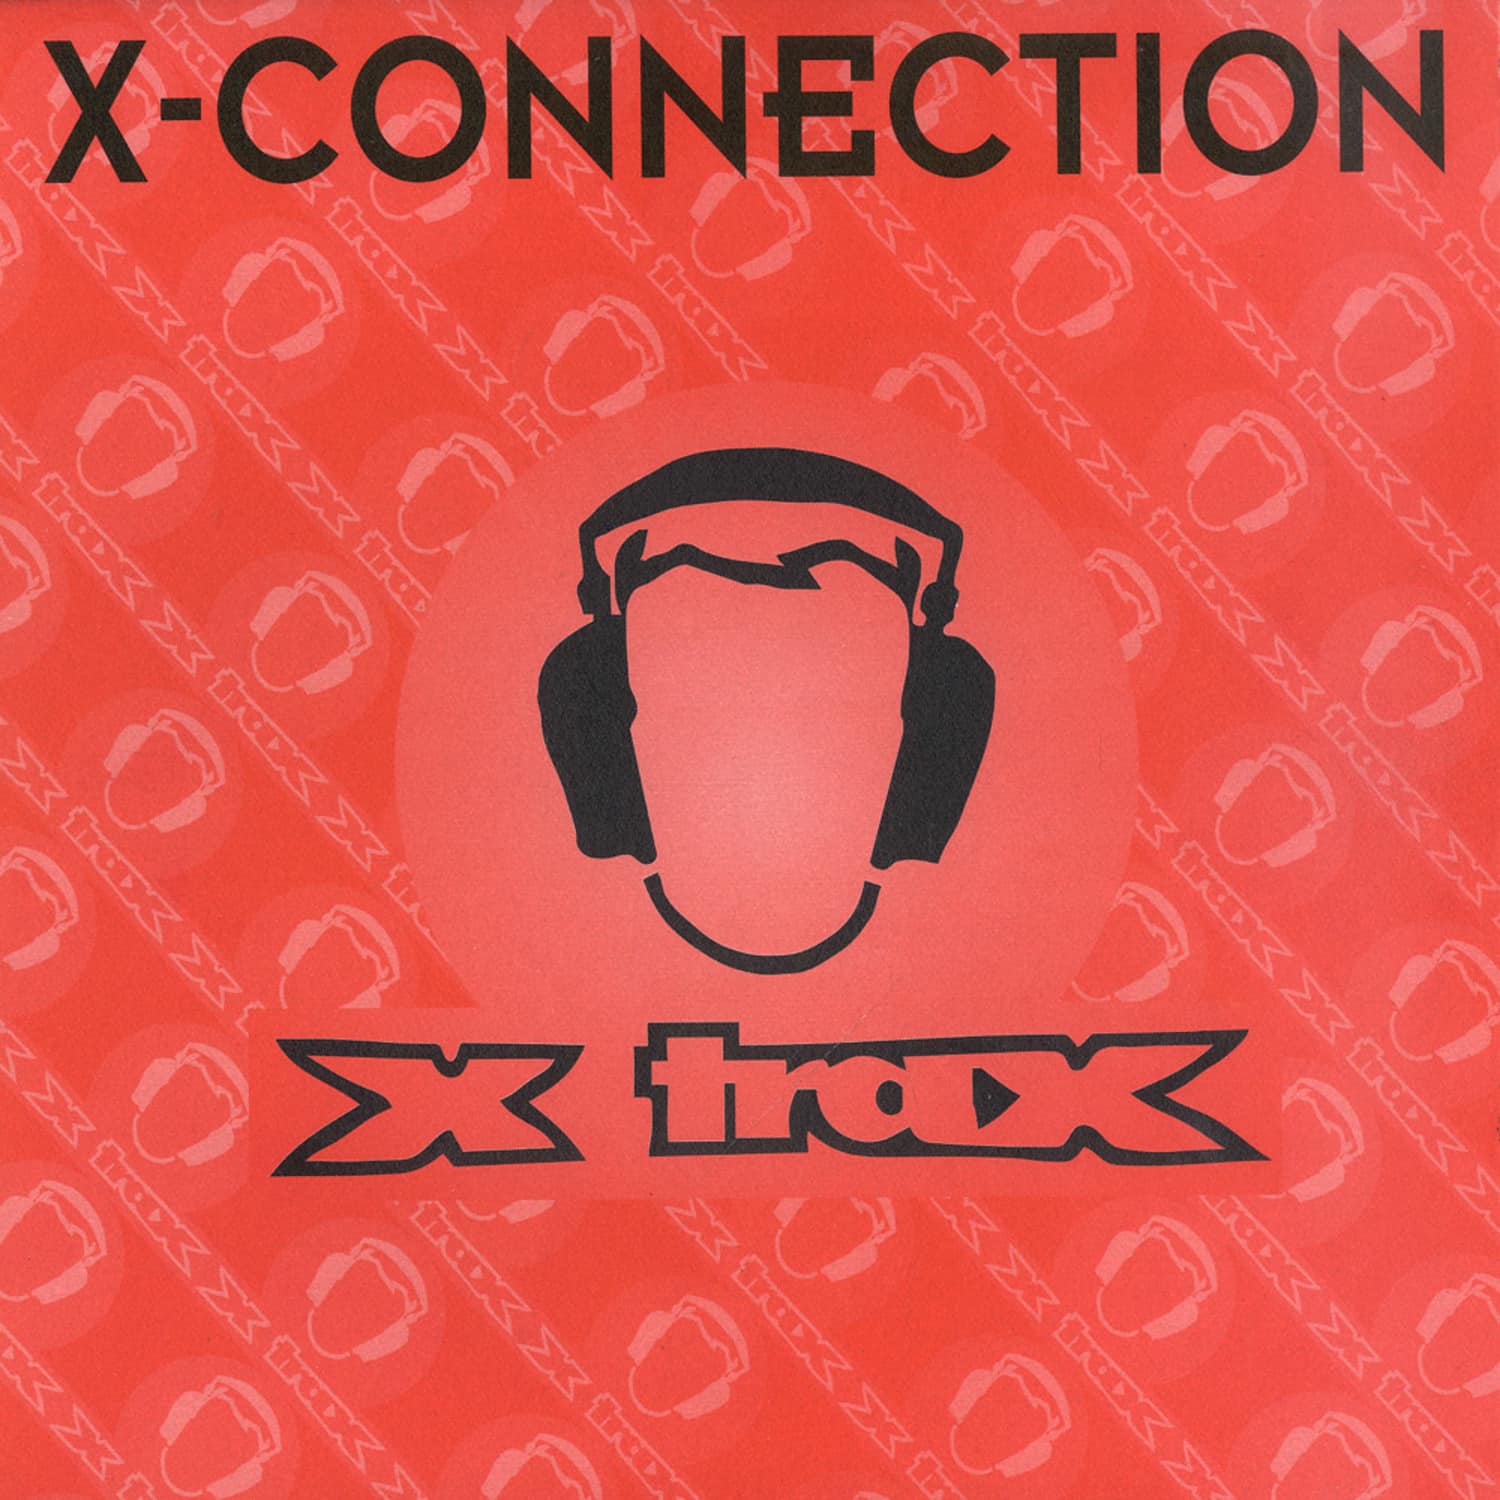 X-Connection - WATCH THEM DOGS